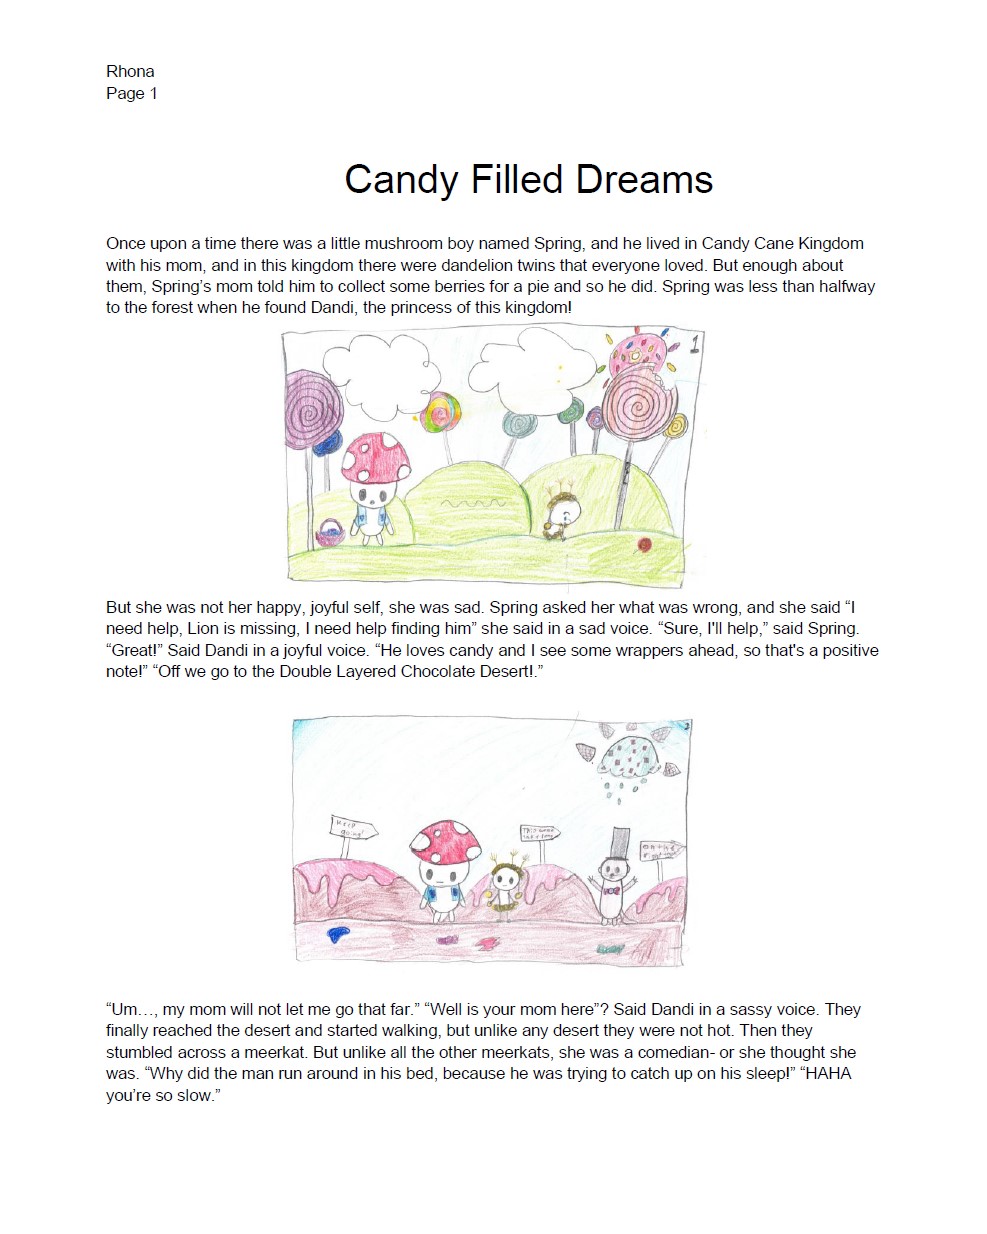 Candy Filled Dreams by Rhona M.